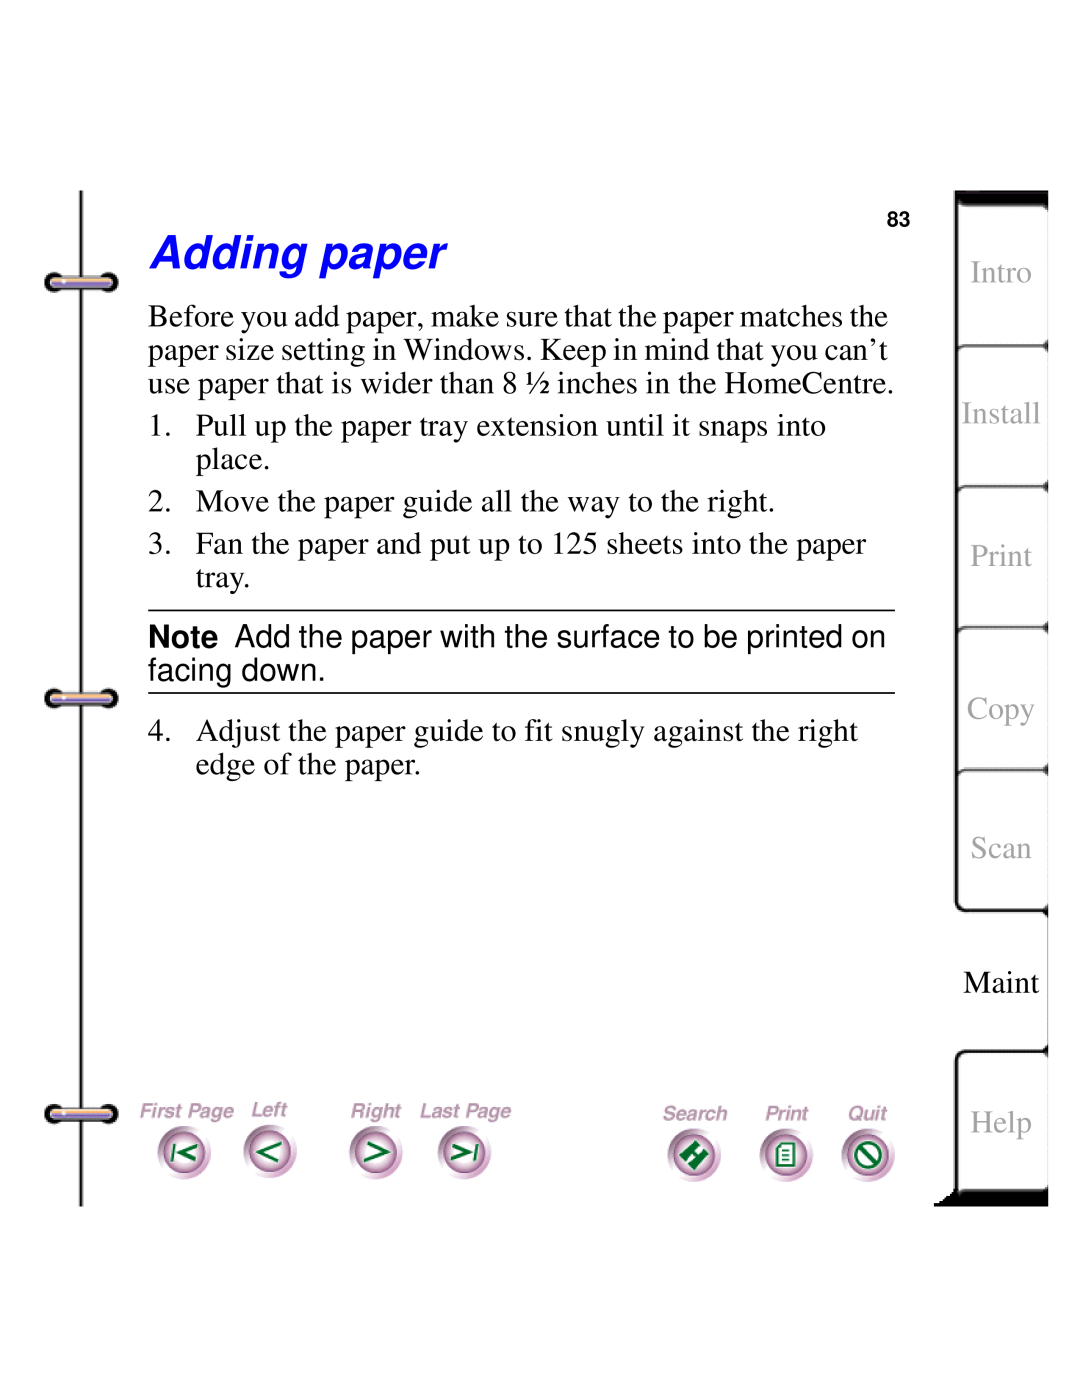 Xerox Document HomeCentre manual Adding paper, Intro Install Print Copy Scan, Help 